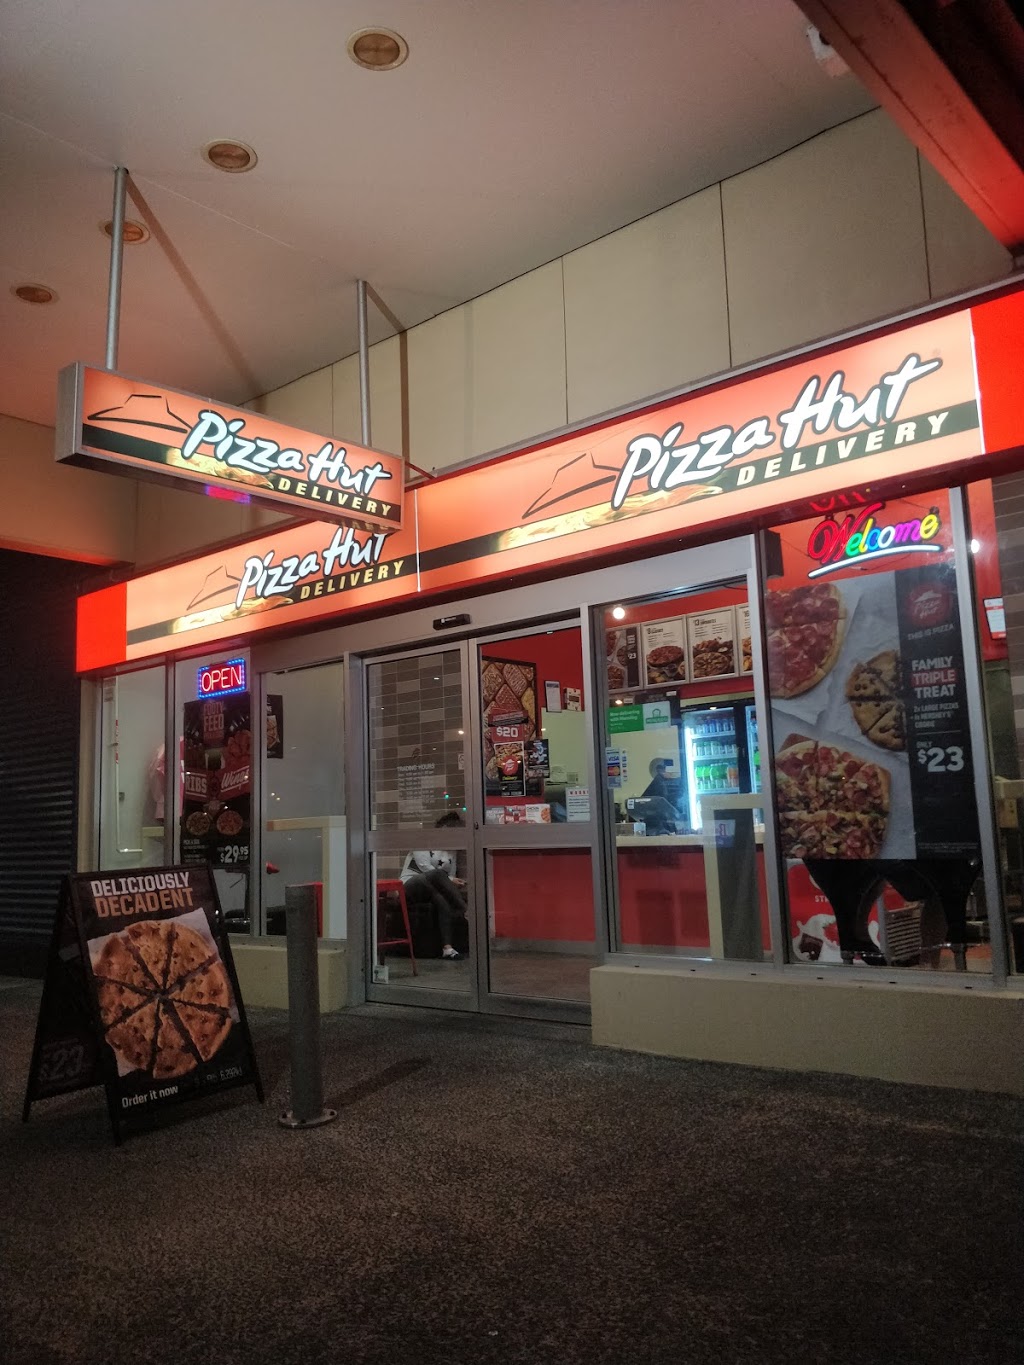 Pizza Hut Burleigh Waters | meal delivery | Shop 6, 1 Santa, Maria Pl, Burleigh Waters QLD 4220, Australia | 131166 OR +61 131166